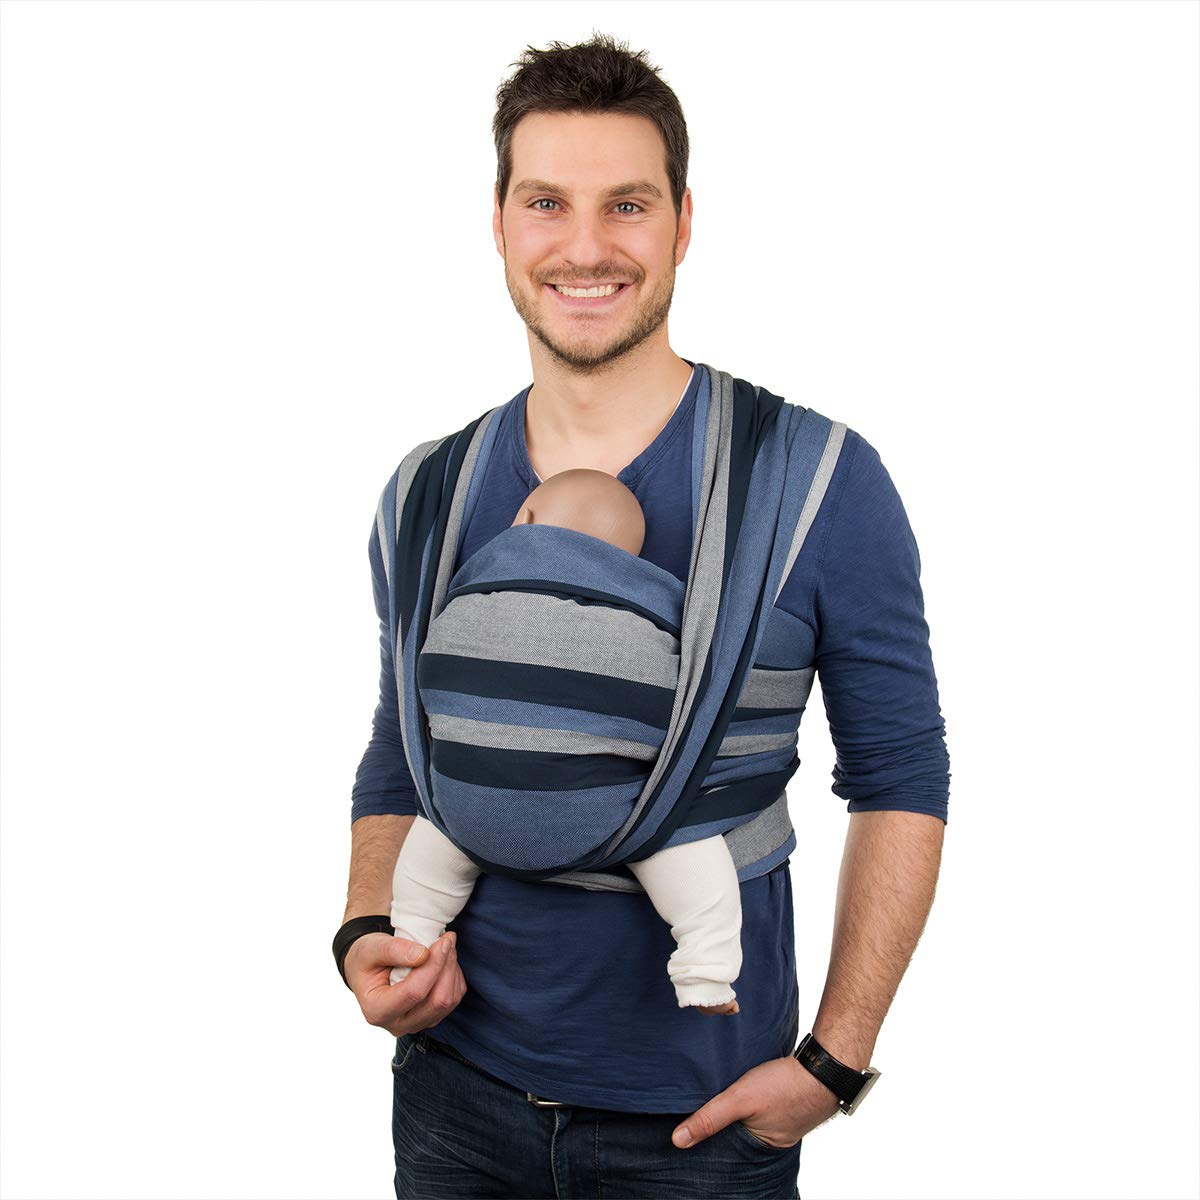 Hoppediz Baby Carrier Sling, Includes Tying Instructions Montreal